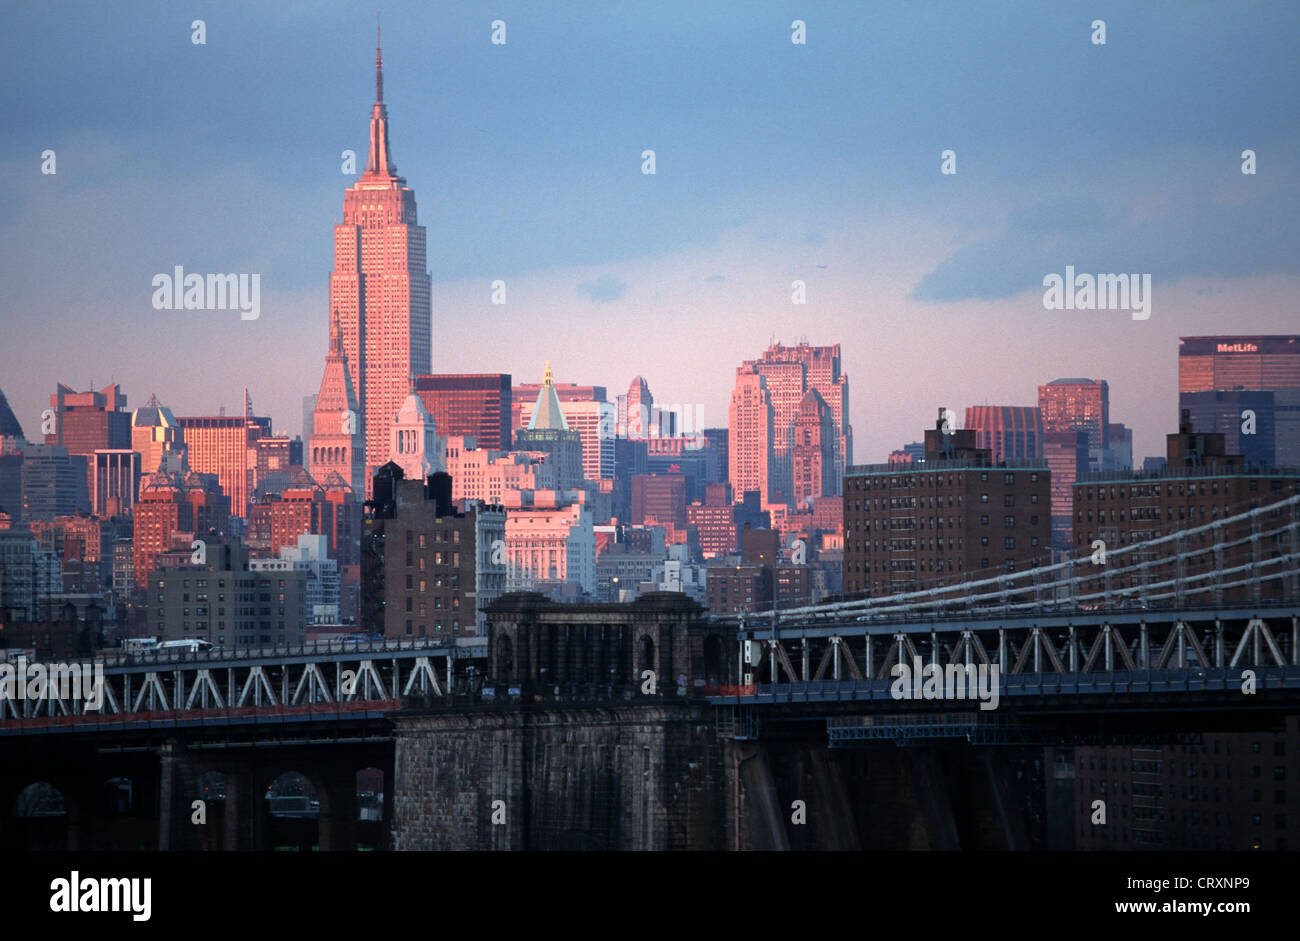 New York City skyline with the Empire State Building Stock Photo